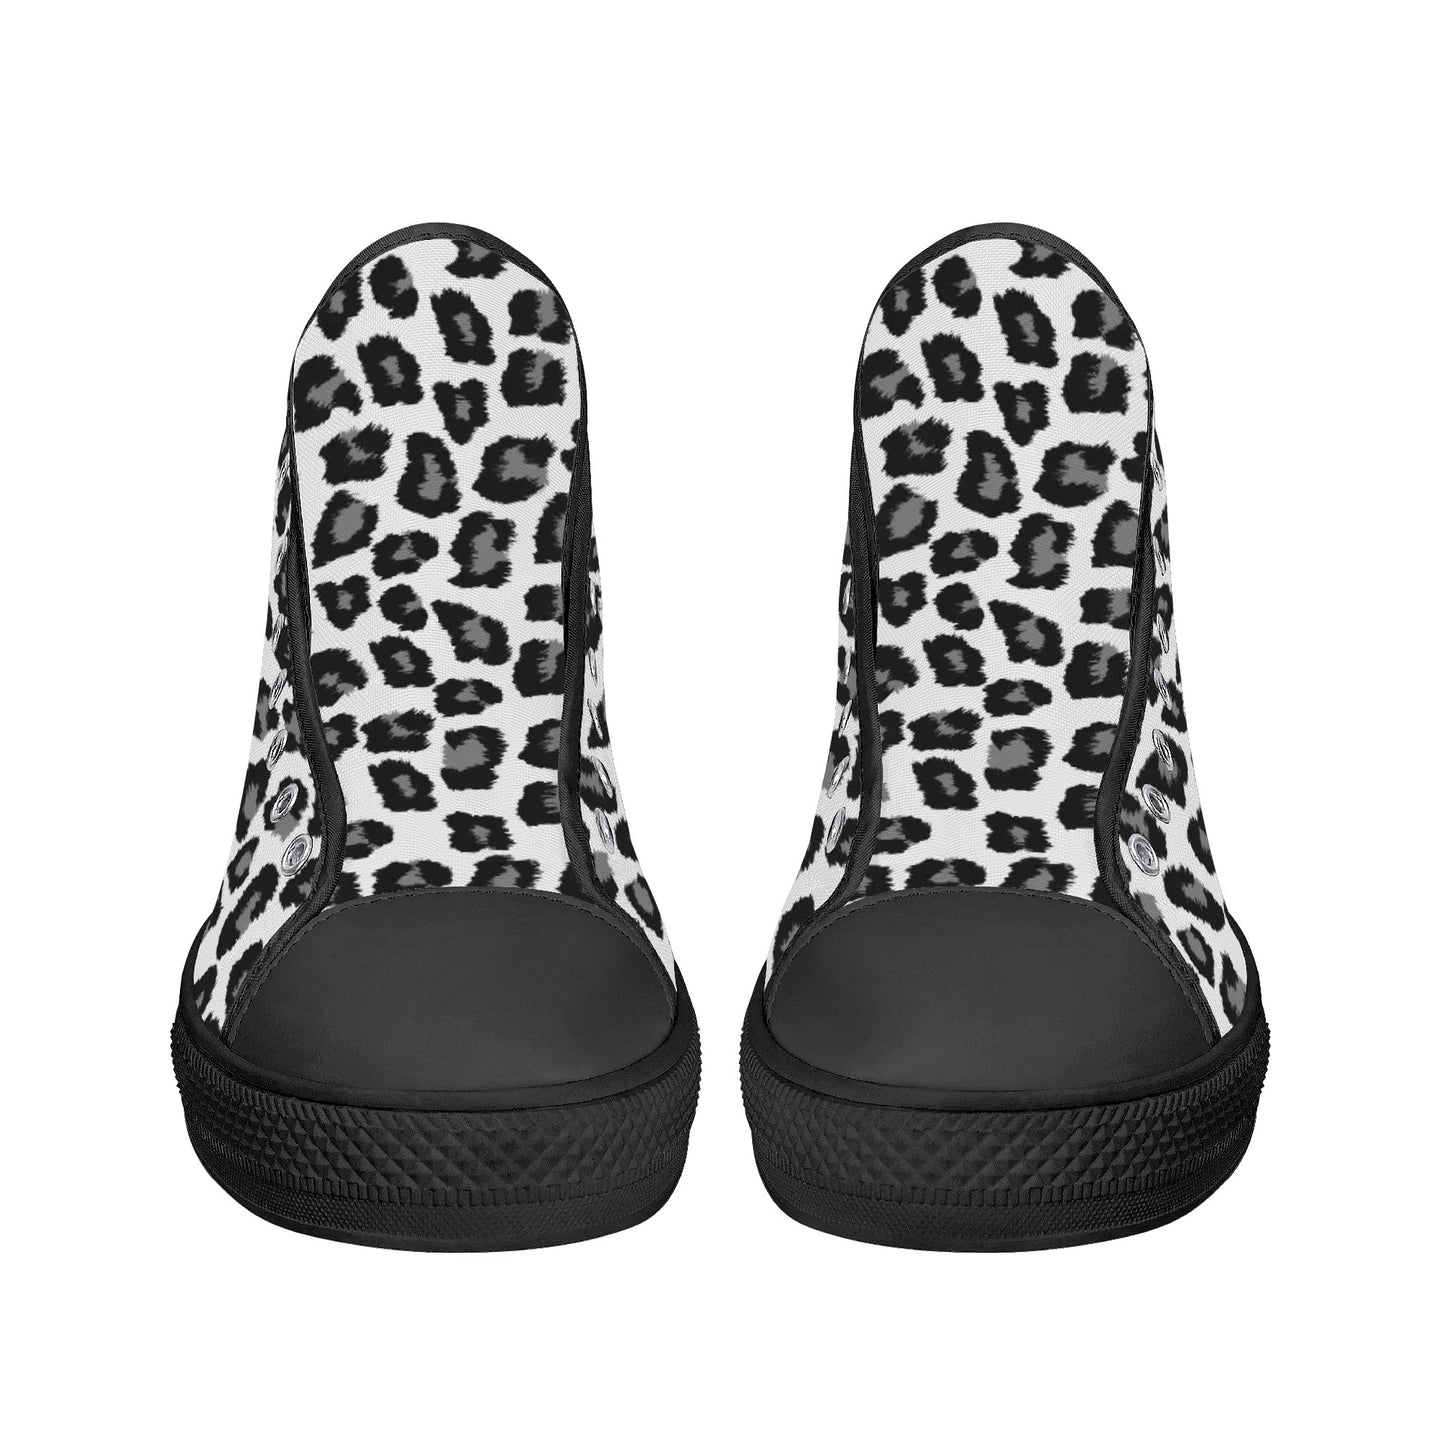 Snow Leopard Women High Top Shoes, Animal Print Lace Up Sneakers Footwear Canvas Streetwear Ladies Girls White Black Trainers Designer Gift